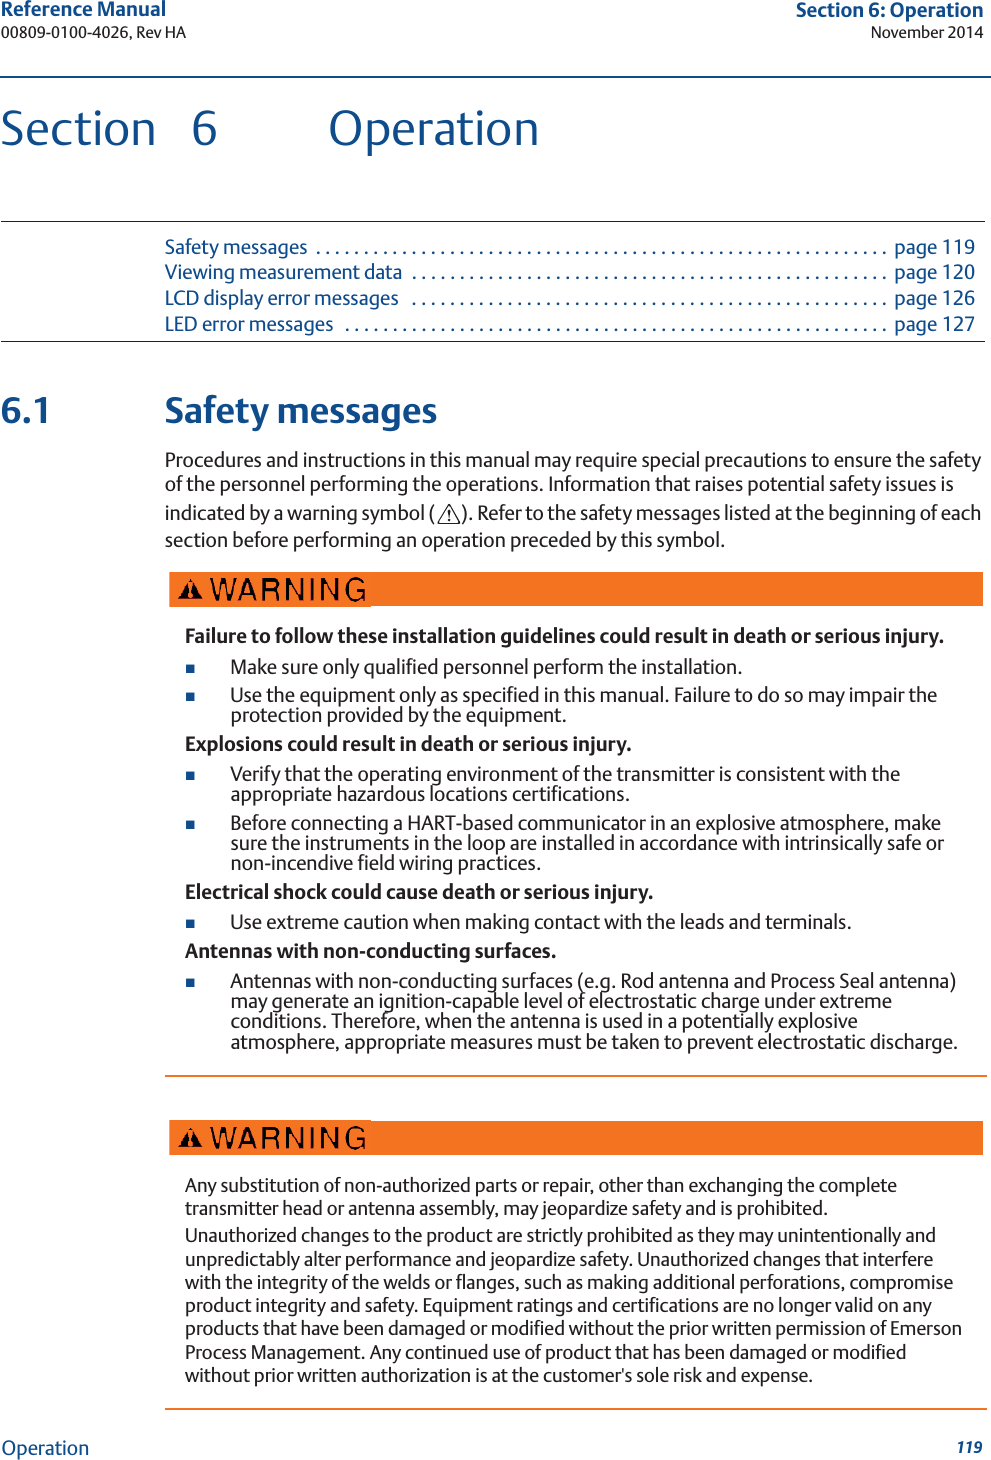 119Reference Manual 00809-0100-4026, Rev HASection 6: OperationNovember 2014OperationSection 6 OperationSafety messages  . . . . . . . . . . . . . . . . . . . . . . . . . . . . . . . . . . . . . . . . . . . . . . . . . . . . . . . . . . . . page 119Viewing measurement data  . . . . . . . . . . . . . . . . . . . . . . . . . . . . . . . . . . . . . . . . . . . . . . . . . .  page 120LCD display error messages   . . . . . . . . . . . . . . . . . . . . . . . . . . . . . . . . . . . . . . . . . . . . . . . . . . page 126LED error messages  . . . . . . . . . . . . . . . . . . . . . . . . . . . . . . . . . . . . . . . . . . . . . . . . . . . . . . . . . page 1276.1 Safety messagesProcedures and instructions in this manual may require special precautions to ensure the safety of the personnel performing the operations. Information that raises potential safety issues is indicated by a warning symbol ( ). Refer to the safety messages listed at the beginning of each section before performing an operation preceded by this symbol.Failure to follow these installation guidelines could result in death or serious injury.Make sure only qualified personnel perform the installation.Use the equipment only as specified in this manual. Failure to do so may impair the protection provided by the equipment.Explosions could result in death or serious injury.Verify that the operating environment of the transmitter is consistent with the appropriate hazardous locations certifications.Before connecting a HART-based communicator in an explosive atmosphere, make sure the instruments in the loop are installed in accordance with intrinsically safe or non-incendive field wiring practices.Electrical shock could cause death or serious injury.Use extreme caution when making contact with the leads and terminals.Antennas with non-conducting surfaces.Antennas with non-conducting surfaces (e.g. Rod antenna and Process Seal antenna) may generate an ignition-capable level of electrostatic charge under extreme conditions. Therefore, when the antenna is used in a potentially explosive atmosphere, appropriate measures must be taken to prevent electrostatic discharge.Any substitution of non-authorized parts or repair, other than exchanging the complete transmitter head or antenna assembly, may jeopardize safety and is prohibited.Unauthorized changes to the product are strictly prohibited as they may unintentionally and unpredictably alter performance and jeopardize safety. Unauthorized changes that interfere with the integrity of the welds or flanges, such as making additional perforations, compromise product integrity and safety. Equipment ratings and certifications are no longer valid on any products that have been damaged or modified without the prior written permission of Emerson Process Management. Any continued use of product that has been damaged or modified without prior written authorization is at the customer&apos;s sole risk and expense.